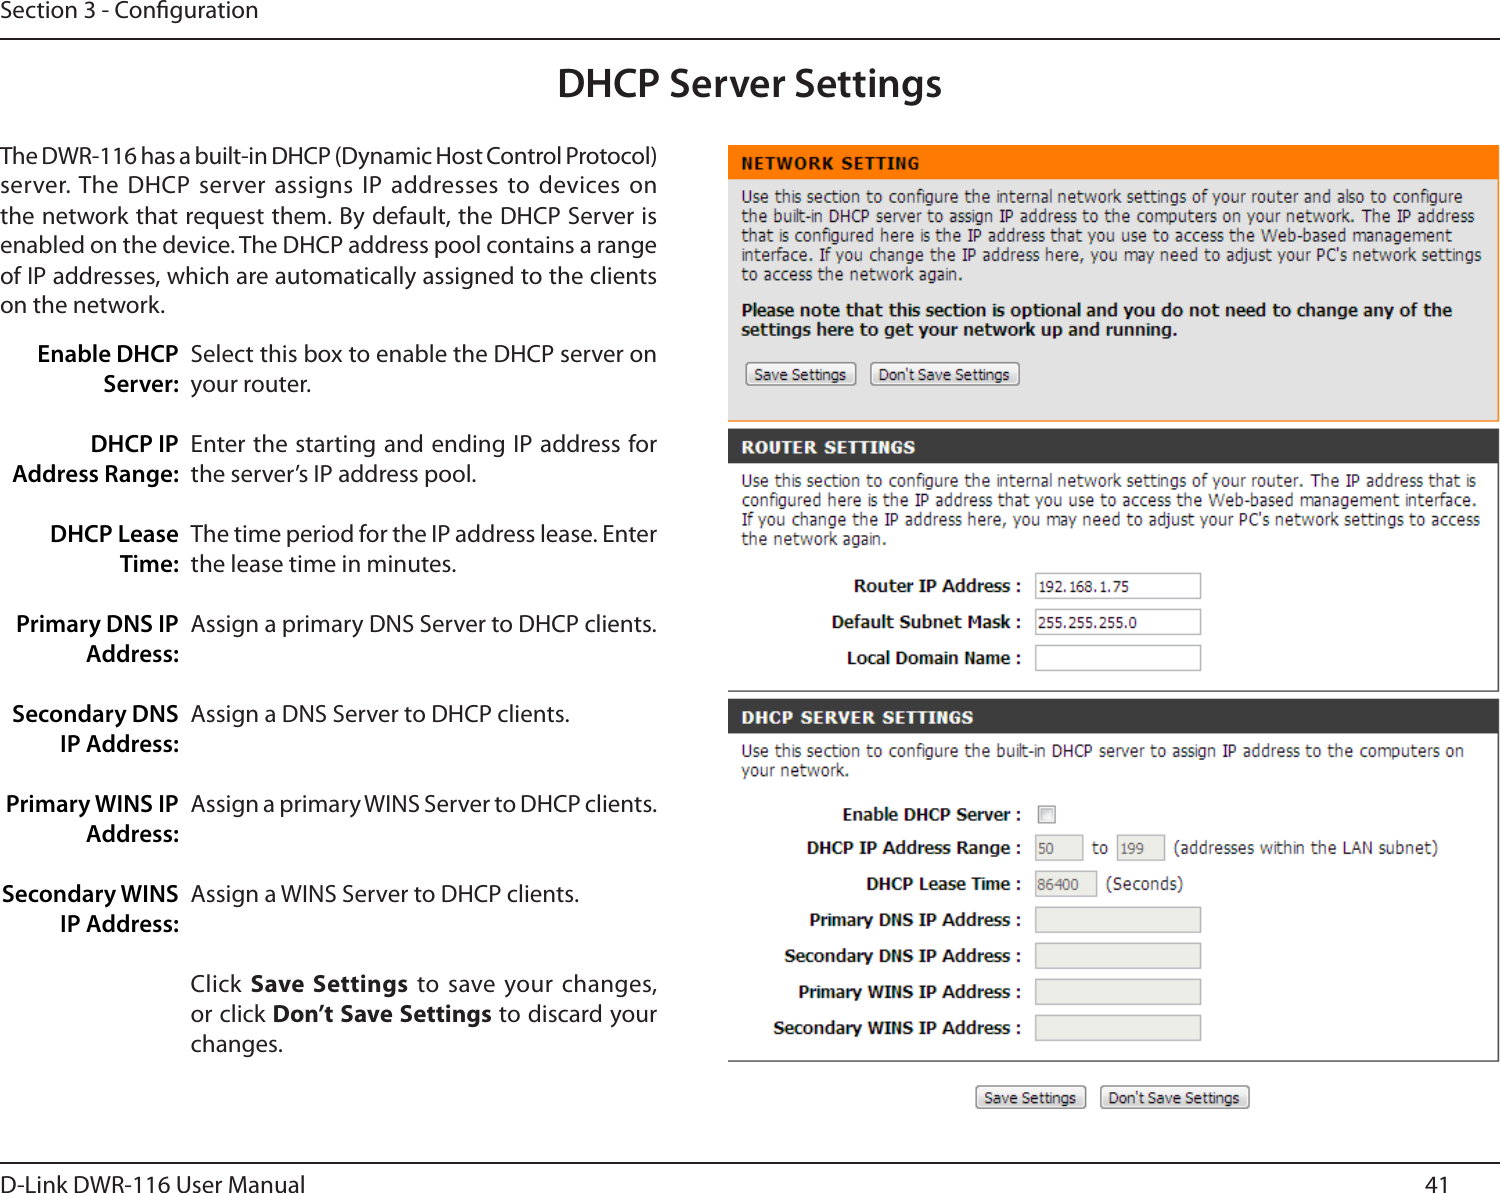 41D-Link DWR-116 User ManualSection 3 - CongurationSelect this box to enable the DHCP server on your router. Enter the starting and ending IP address for the server’s IP address pool.The time period for the IP address lease. Enter the lease time in minutes.Assign a primary DNS Server to DHCP clients.Assign a DNS Server to DHCP clients.Assign a primary WINS Server to DHCP clients. Assign a WINS Server to DHCP clients.Click Save  Settings to save your changes, or click Don’t Save Settings to discard your changes.Enable DHCP Server:DHCP IP Address Range:DHCP Lease Time:Primary DNS IP Address:Secondary DNS IP Address:Primary WINS IP Address:Secondary WINS IP Address:DHCP Server SettingsThe DWR-116 has a built-in DHCP (Dynamic Host Control Protocol) server. The DHCP server assigns IP  addresses to devices  on the network that request them. By default, the DHCP Server is enabled on the device. The DHCP address pool contains a range of IP addresses, which are automatically assigned to the clients on the network.